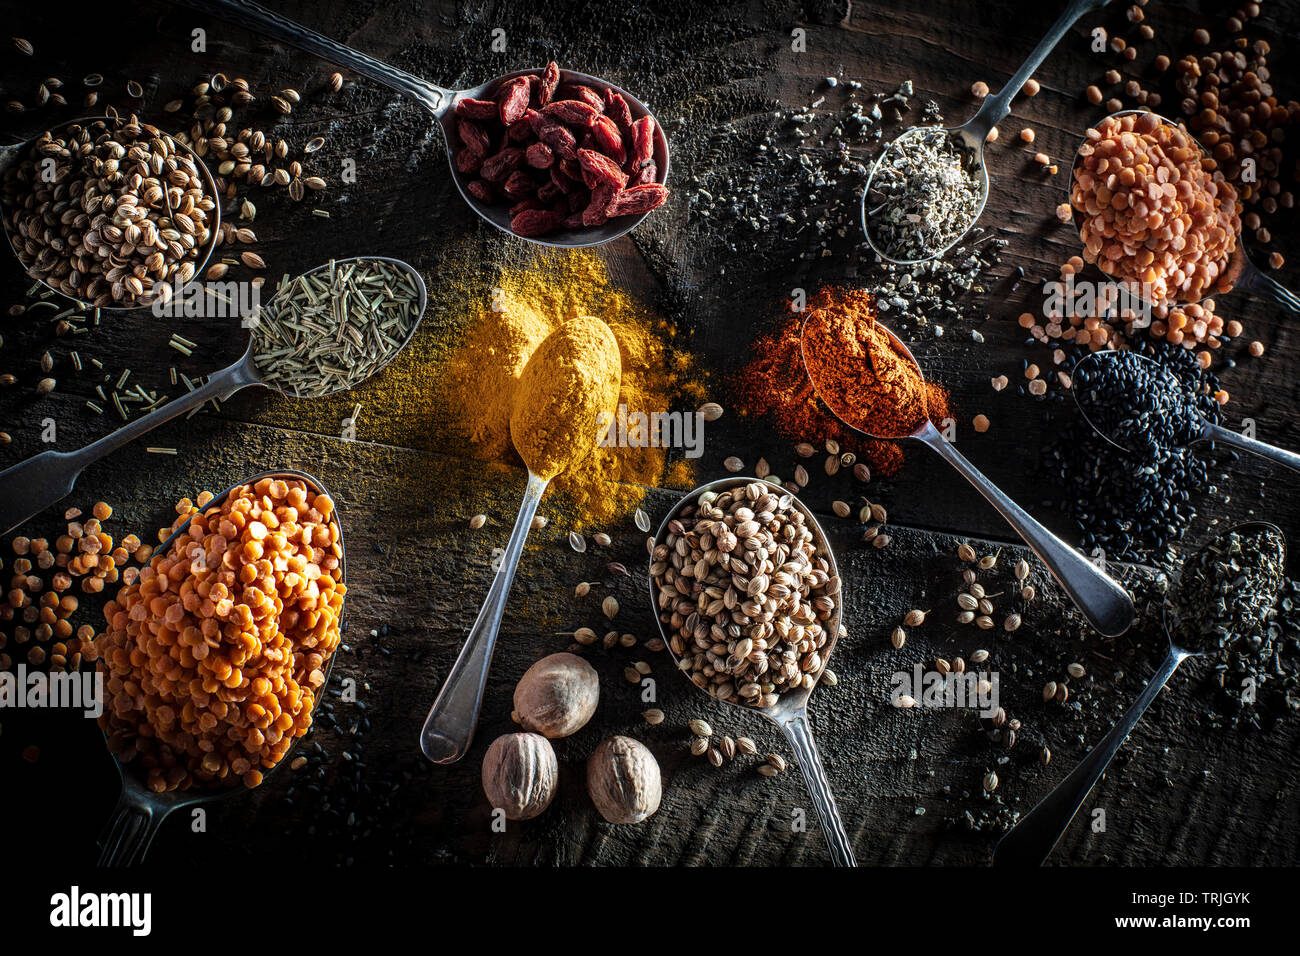 Selection of spices on old antique silver spoons, turmeric, lentils, mustard seeds, nutmeg, cumin poppy agains a dark wood background shot from above Stock Photo